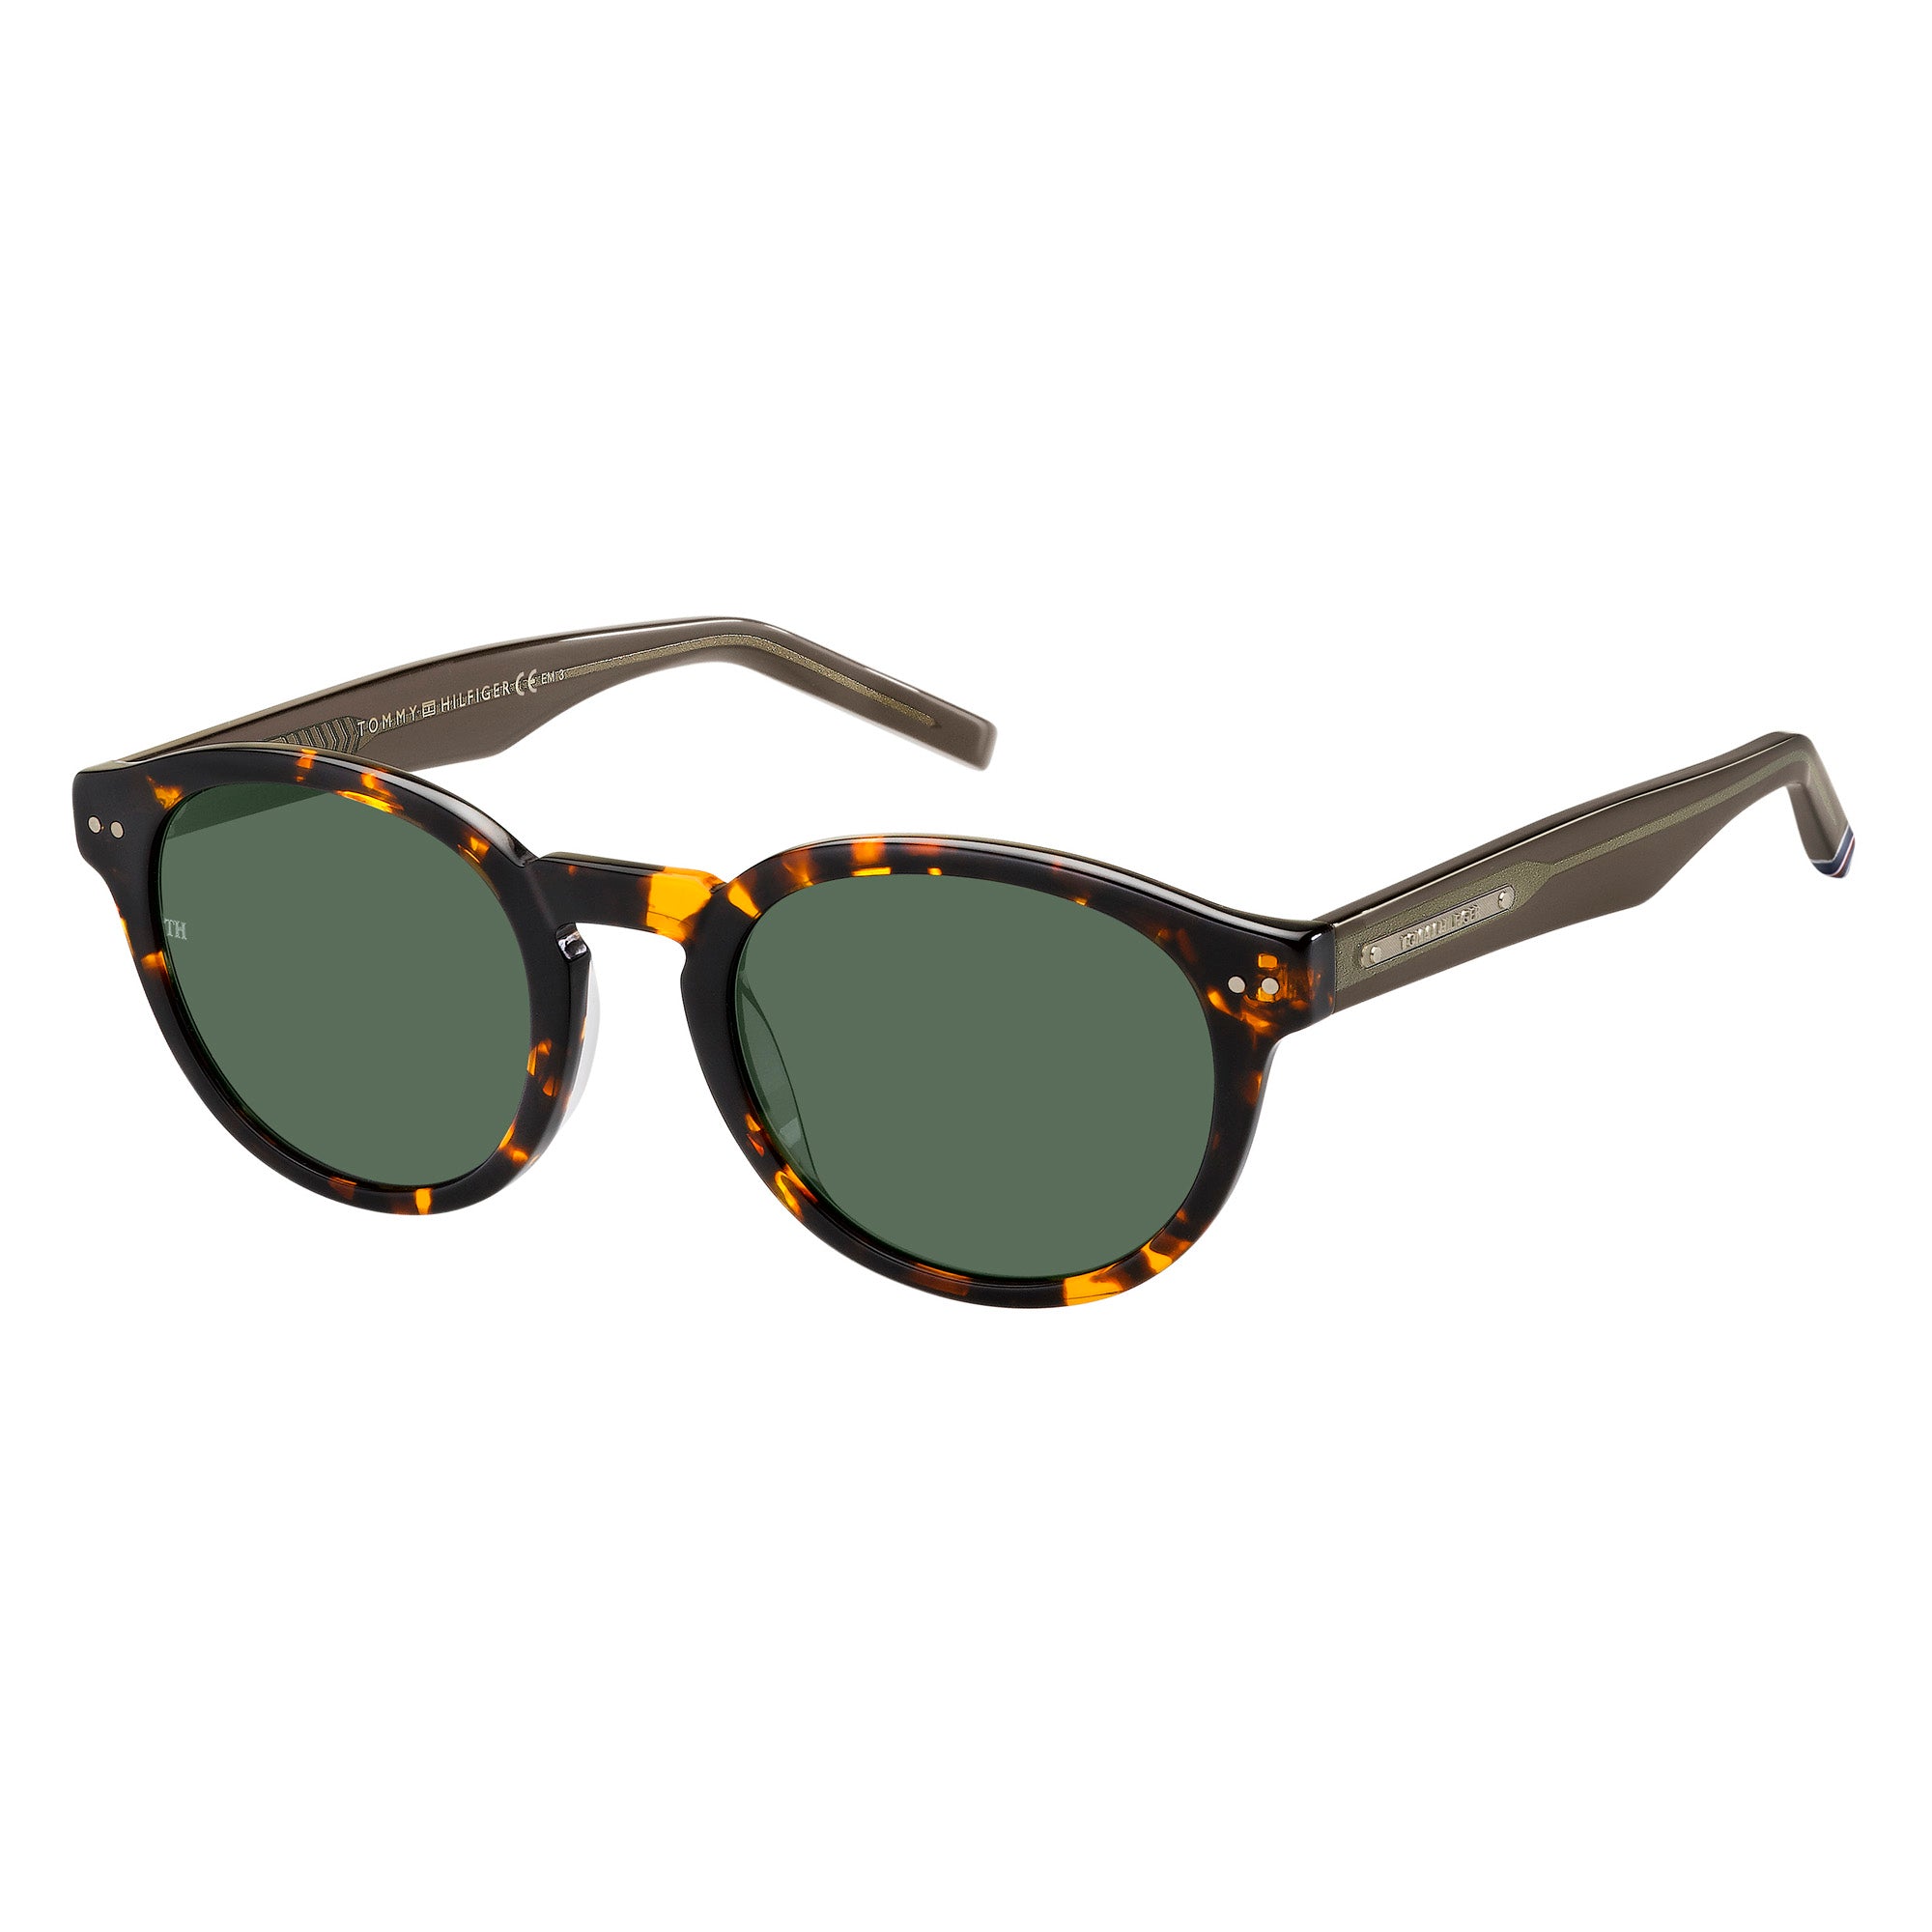 Tommy Hilfiger 1713/S 086 50QT Unisex Sunglasses from